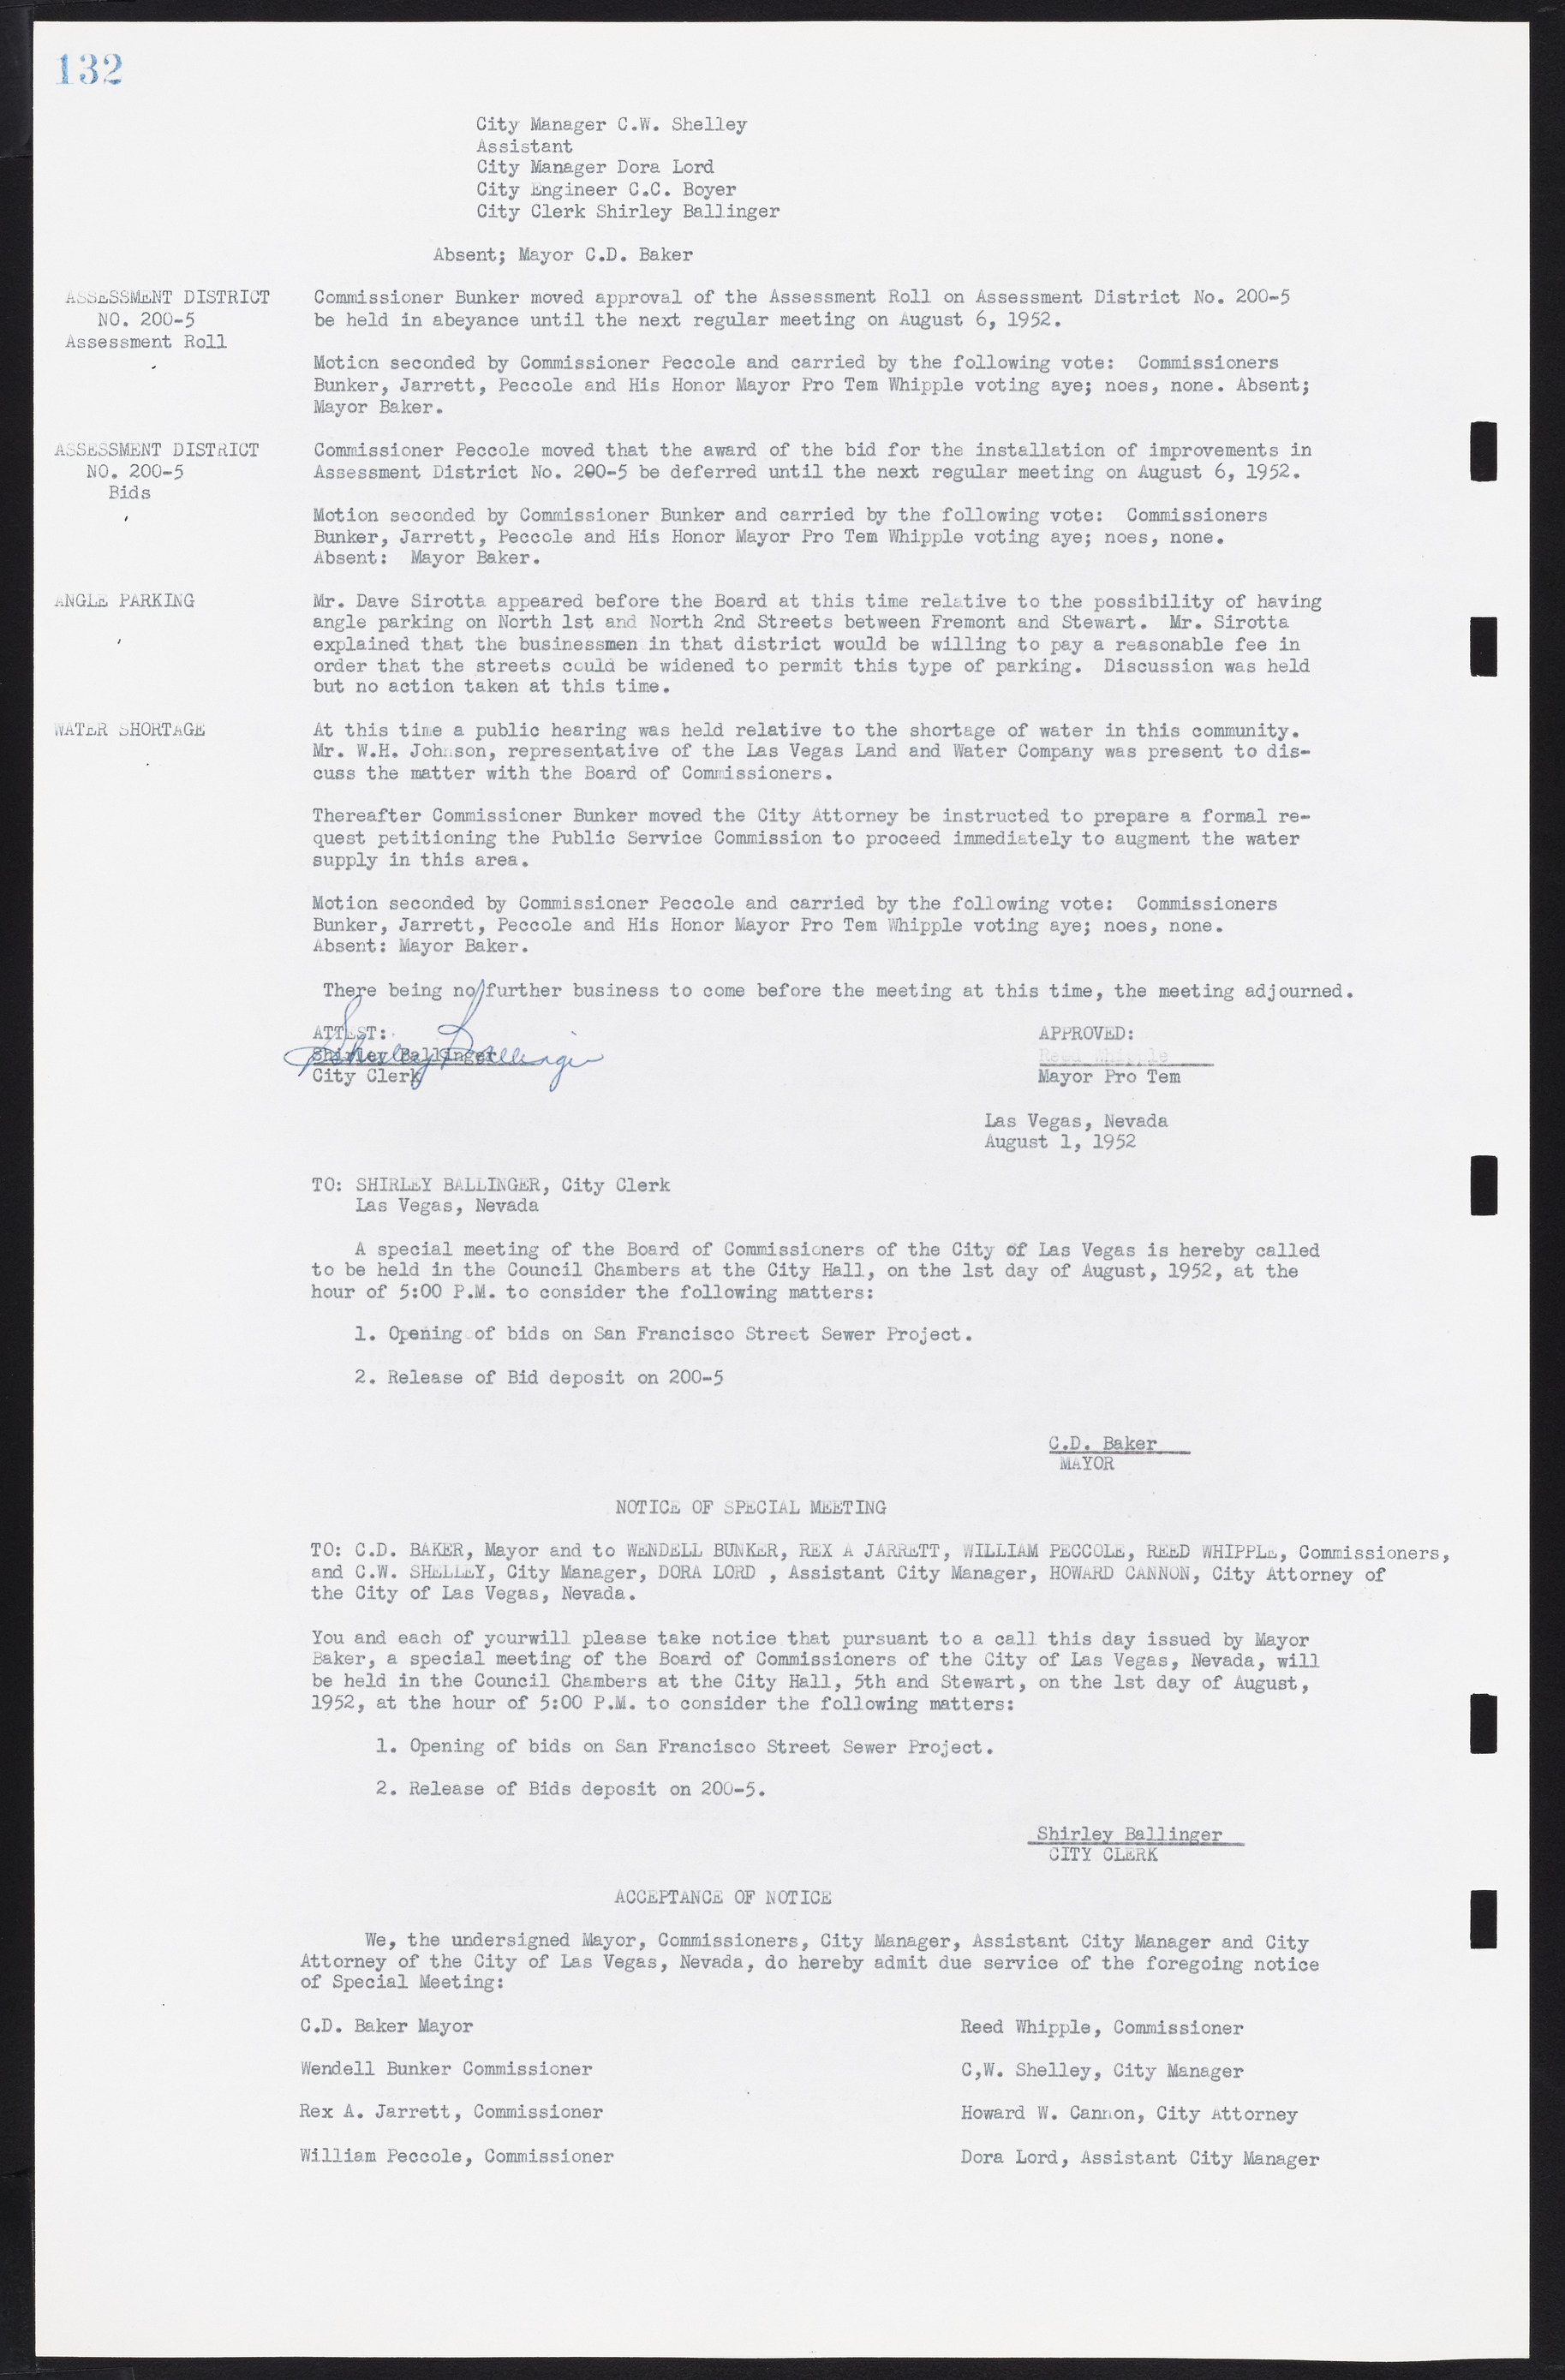 Las Vegas City Commission Minutes, May 26, 1952 to February 17, 1954, lvc000008-138